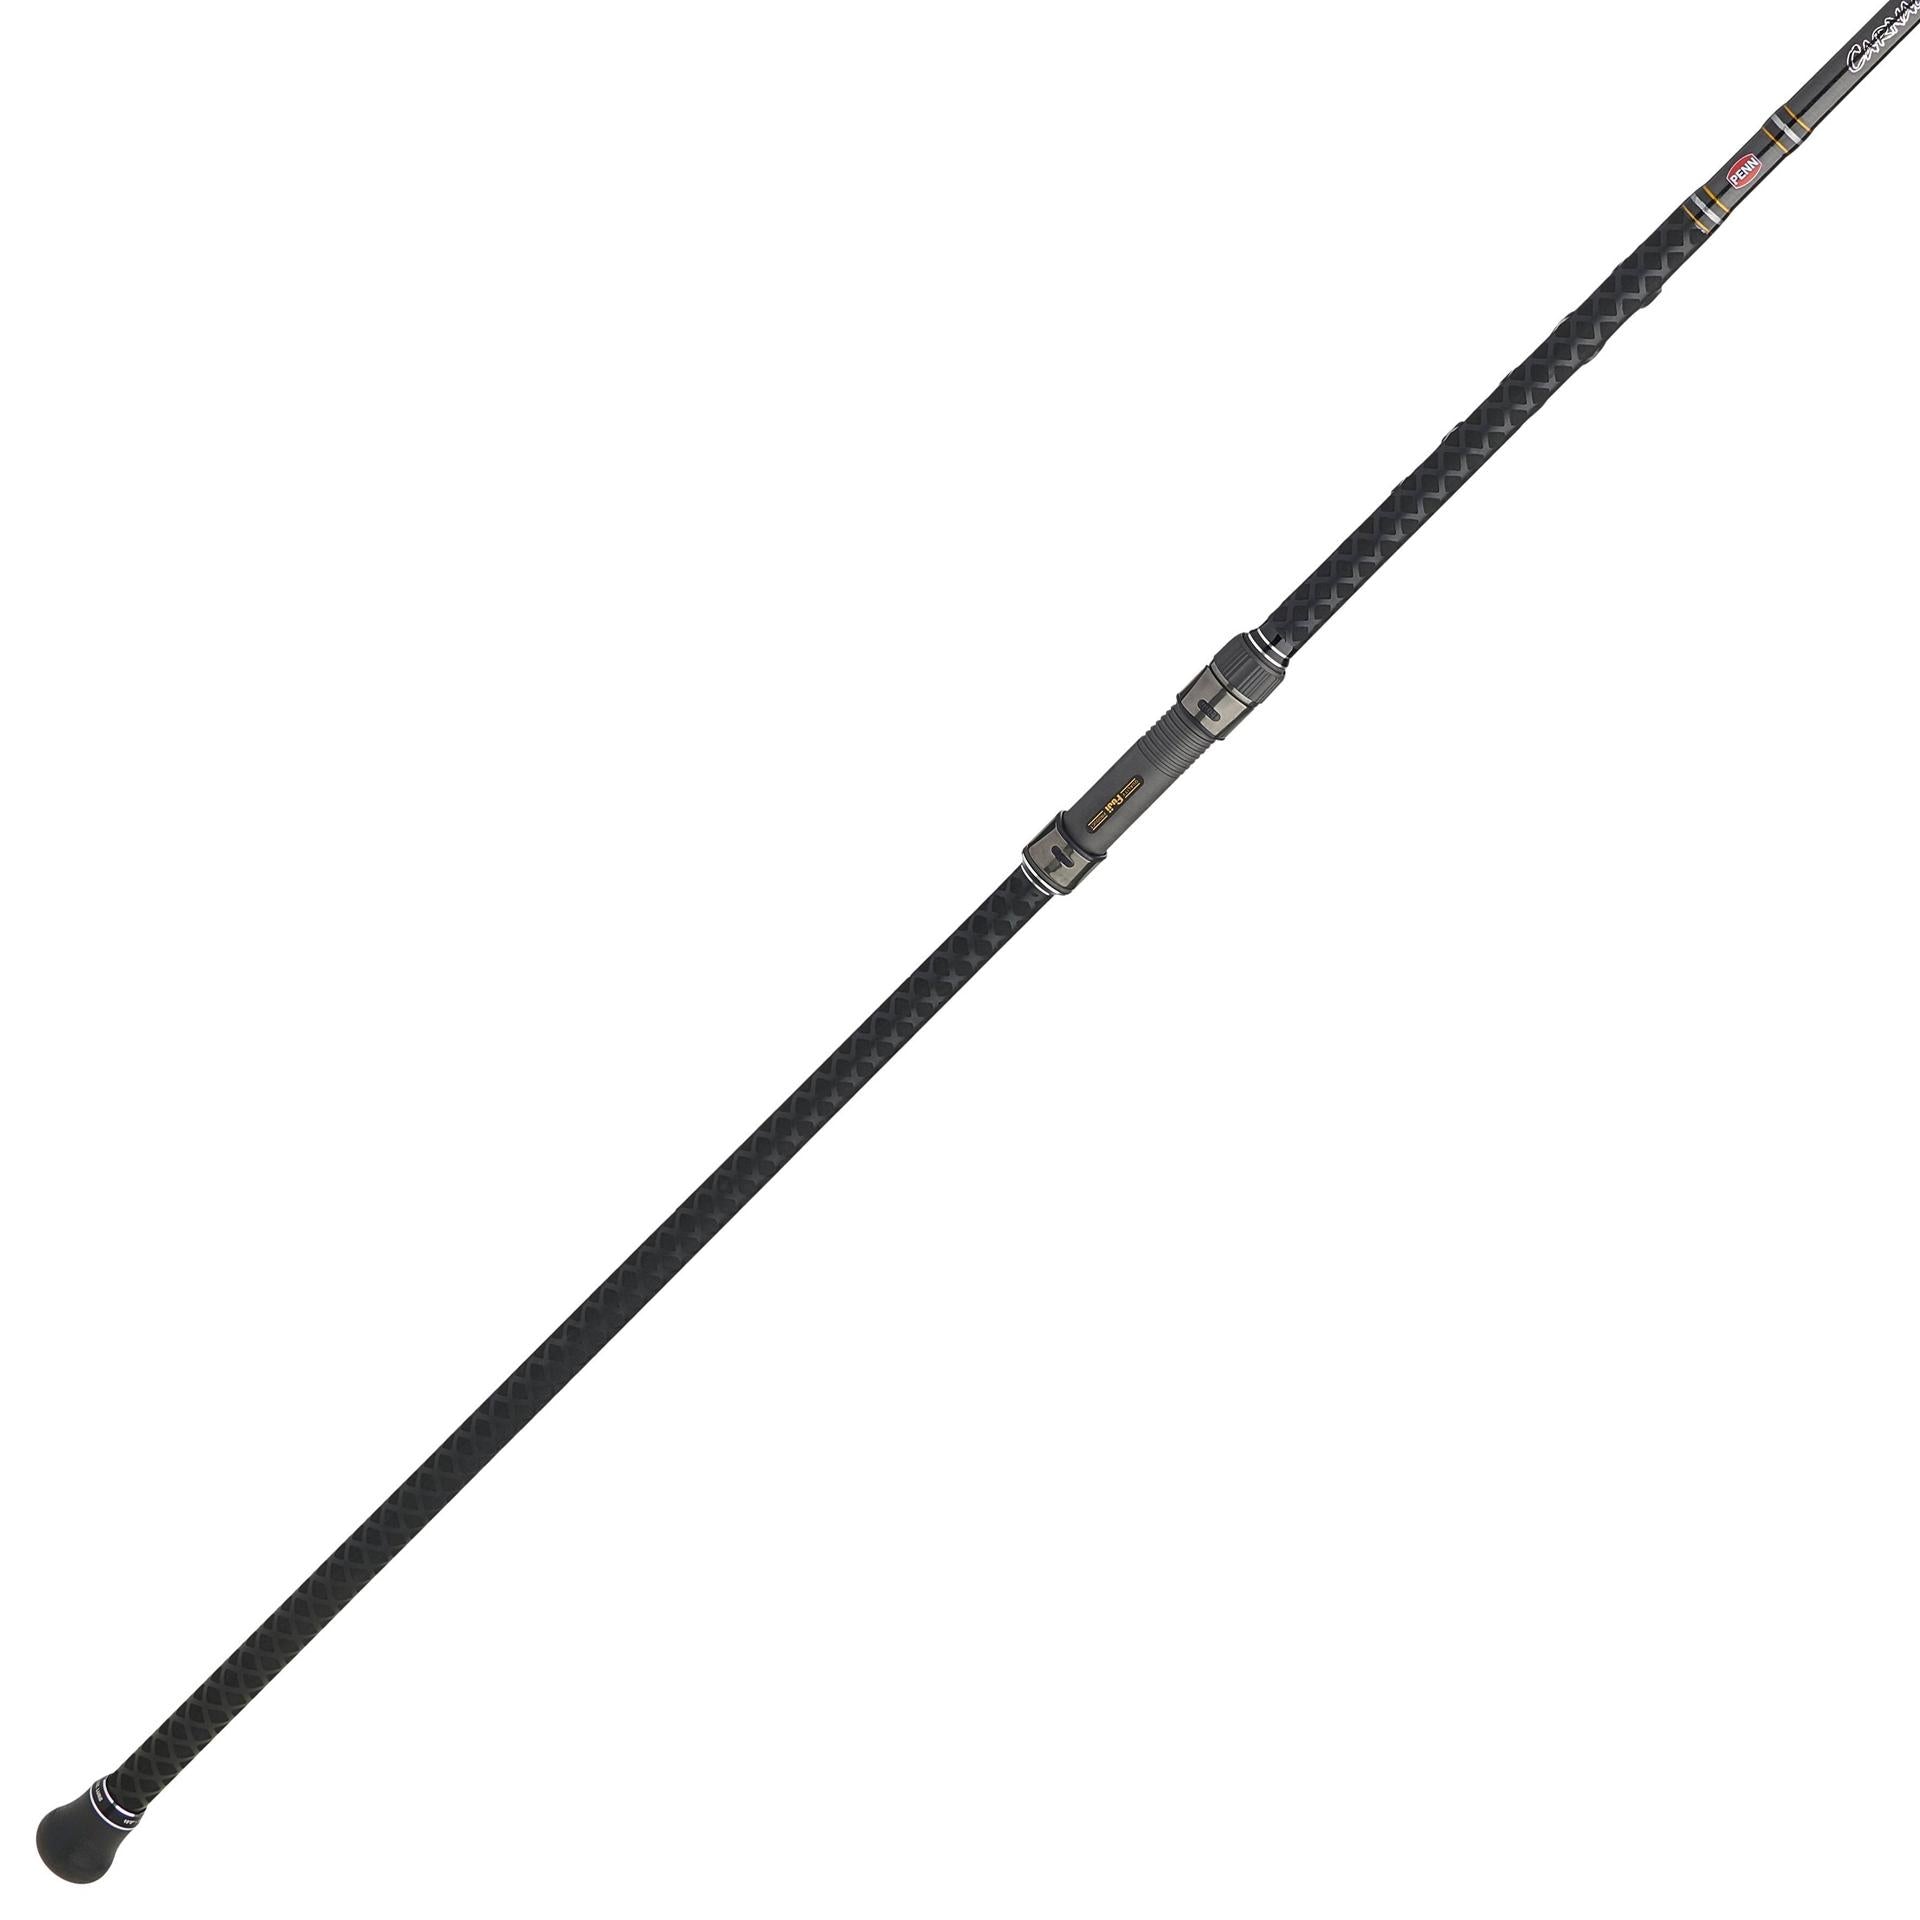 Carnage™ III Conventional Surf Rod